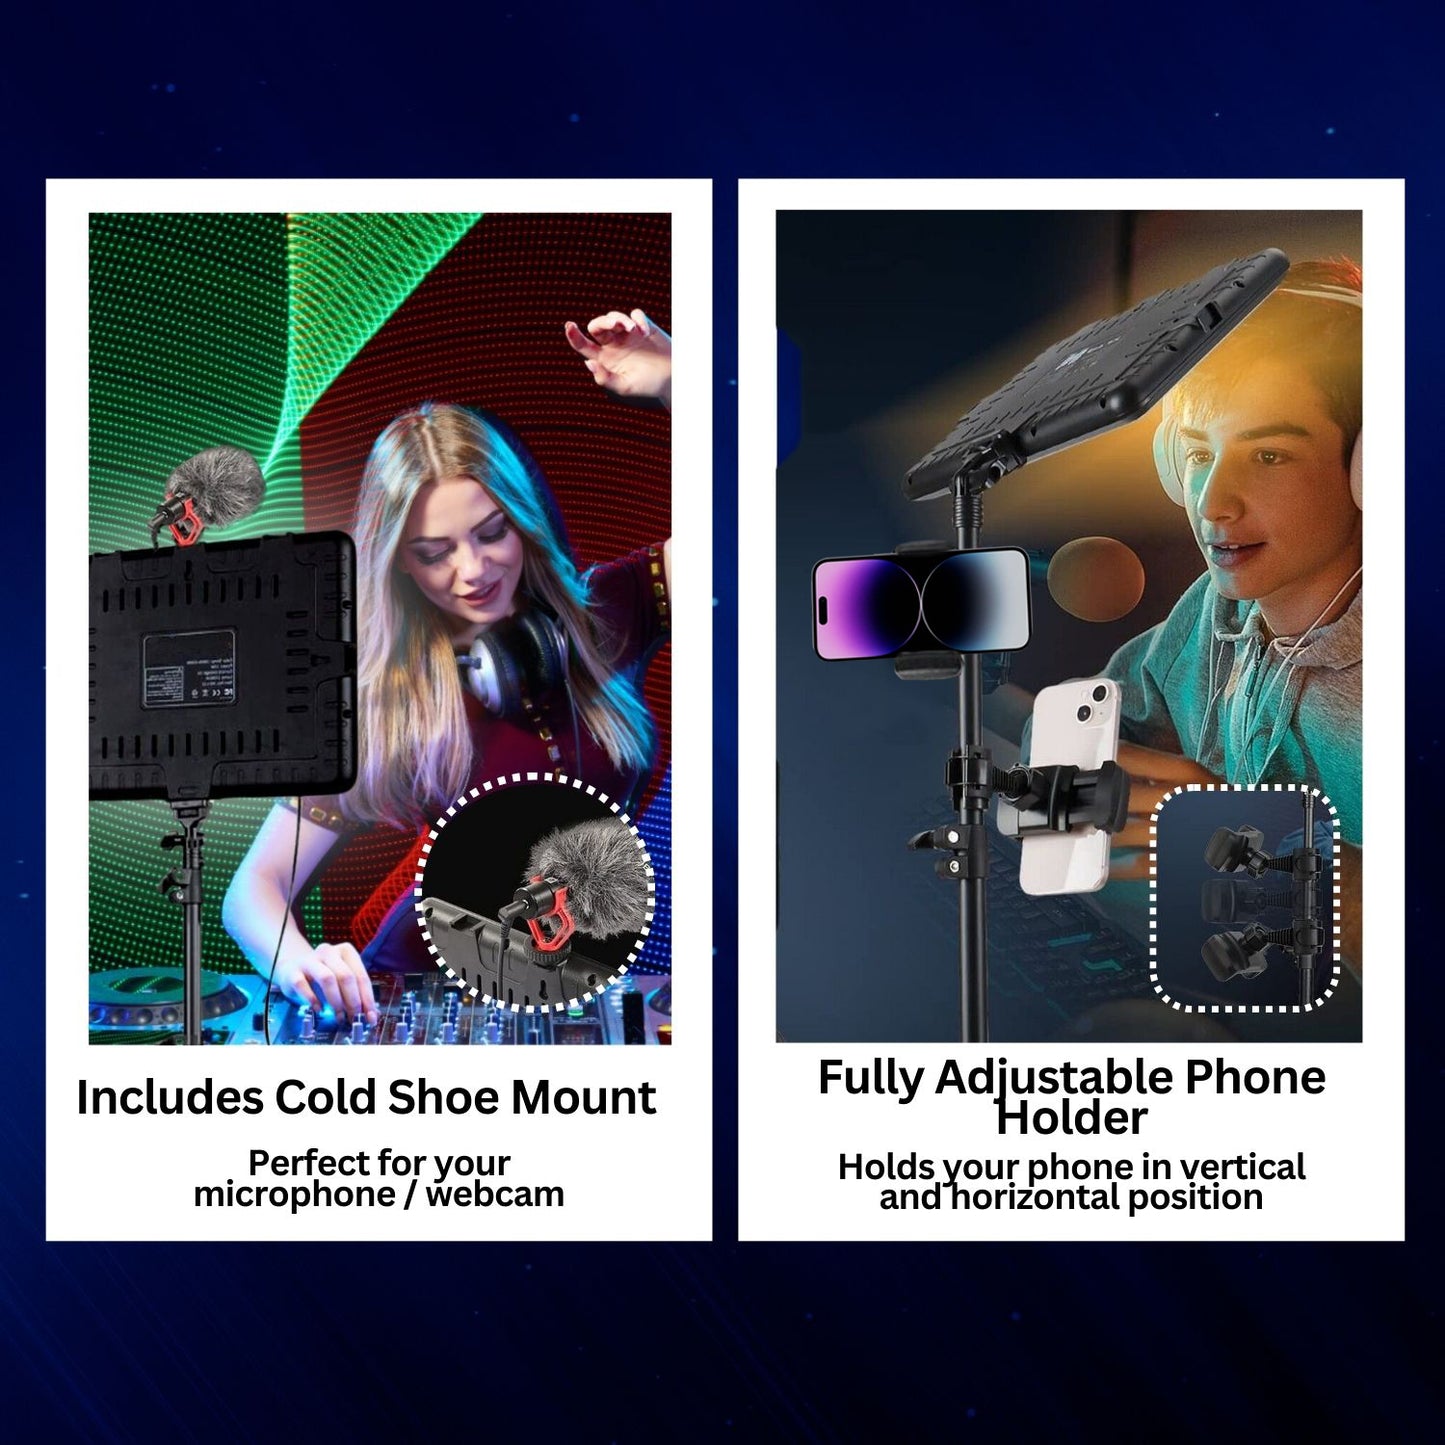 More details of Panel Lighting which includes cold mount shoe and fully adjustable phone holder: woman recording using panel lighting and a content creator attached phone to the panel